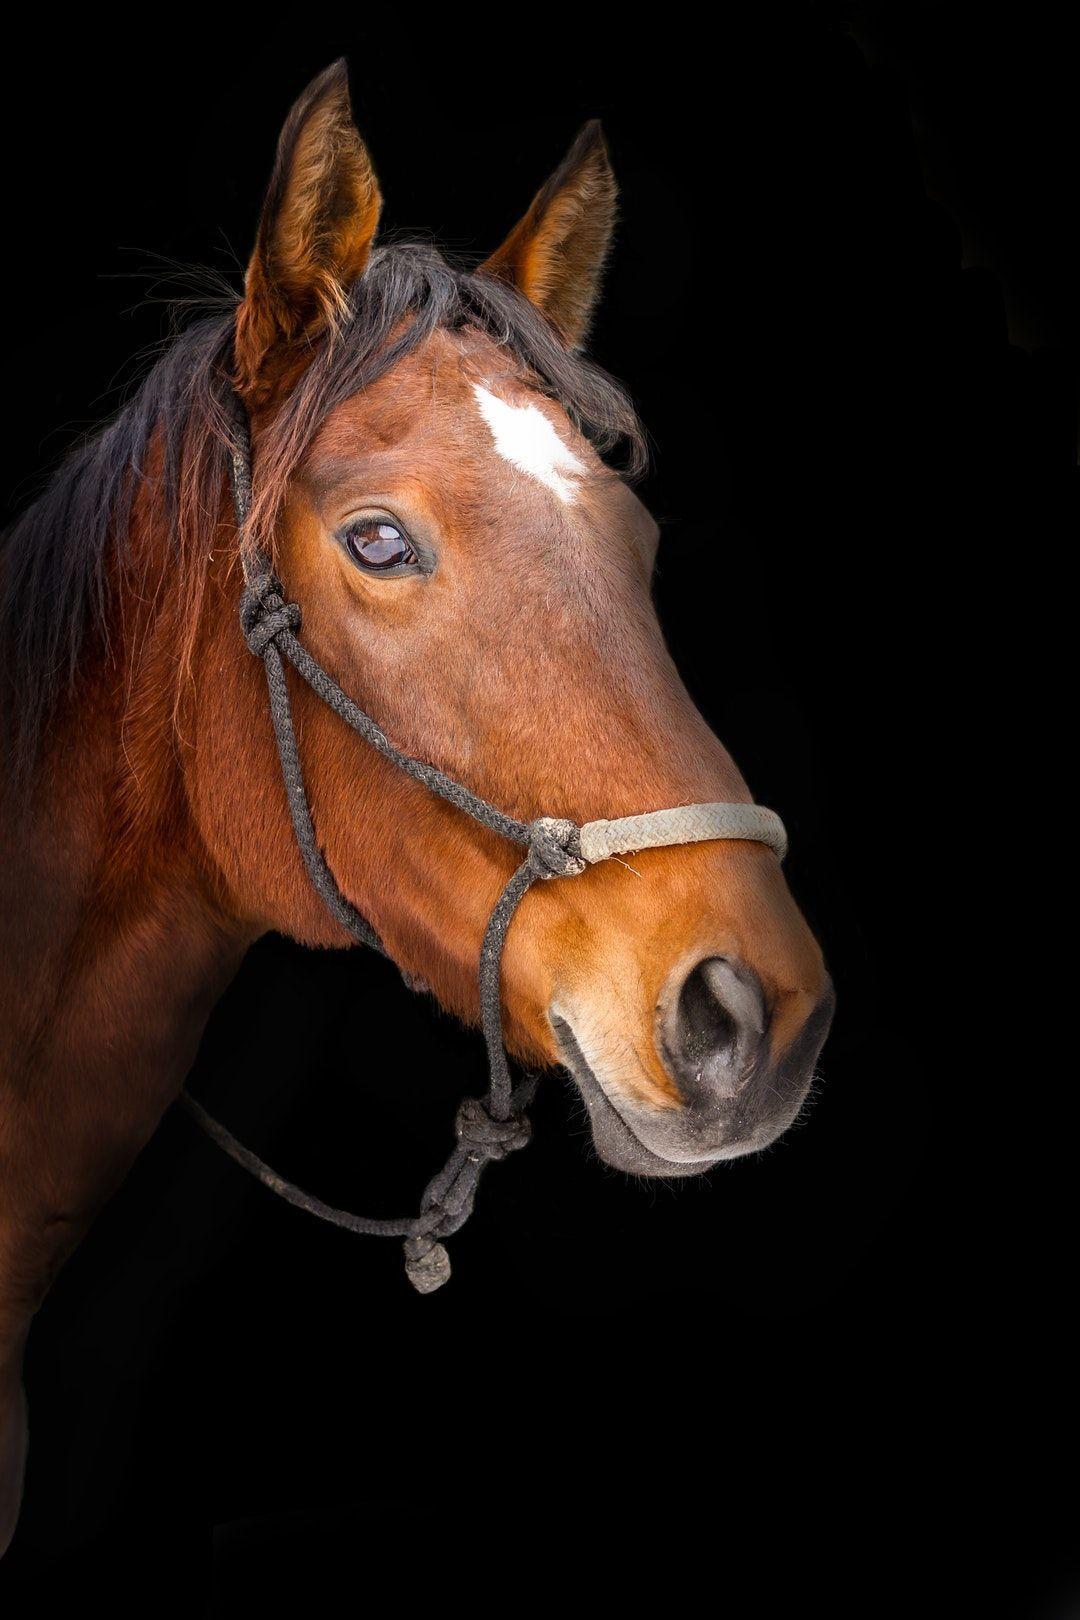 Stunning Collection of 4K Horse Images - Over 999 High-Quality Horse Images